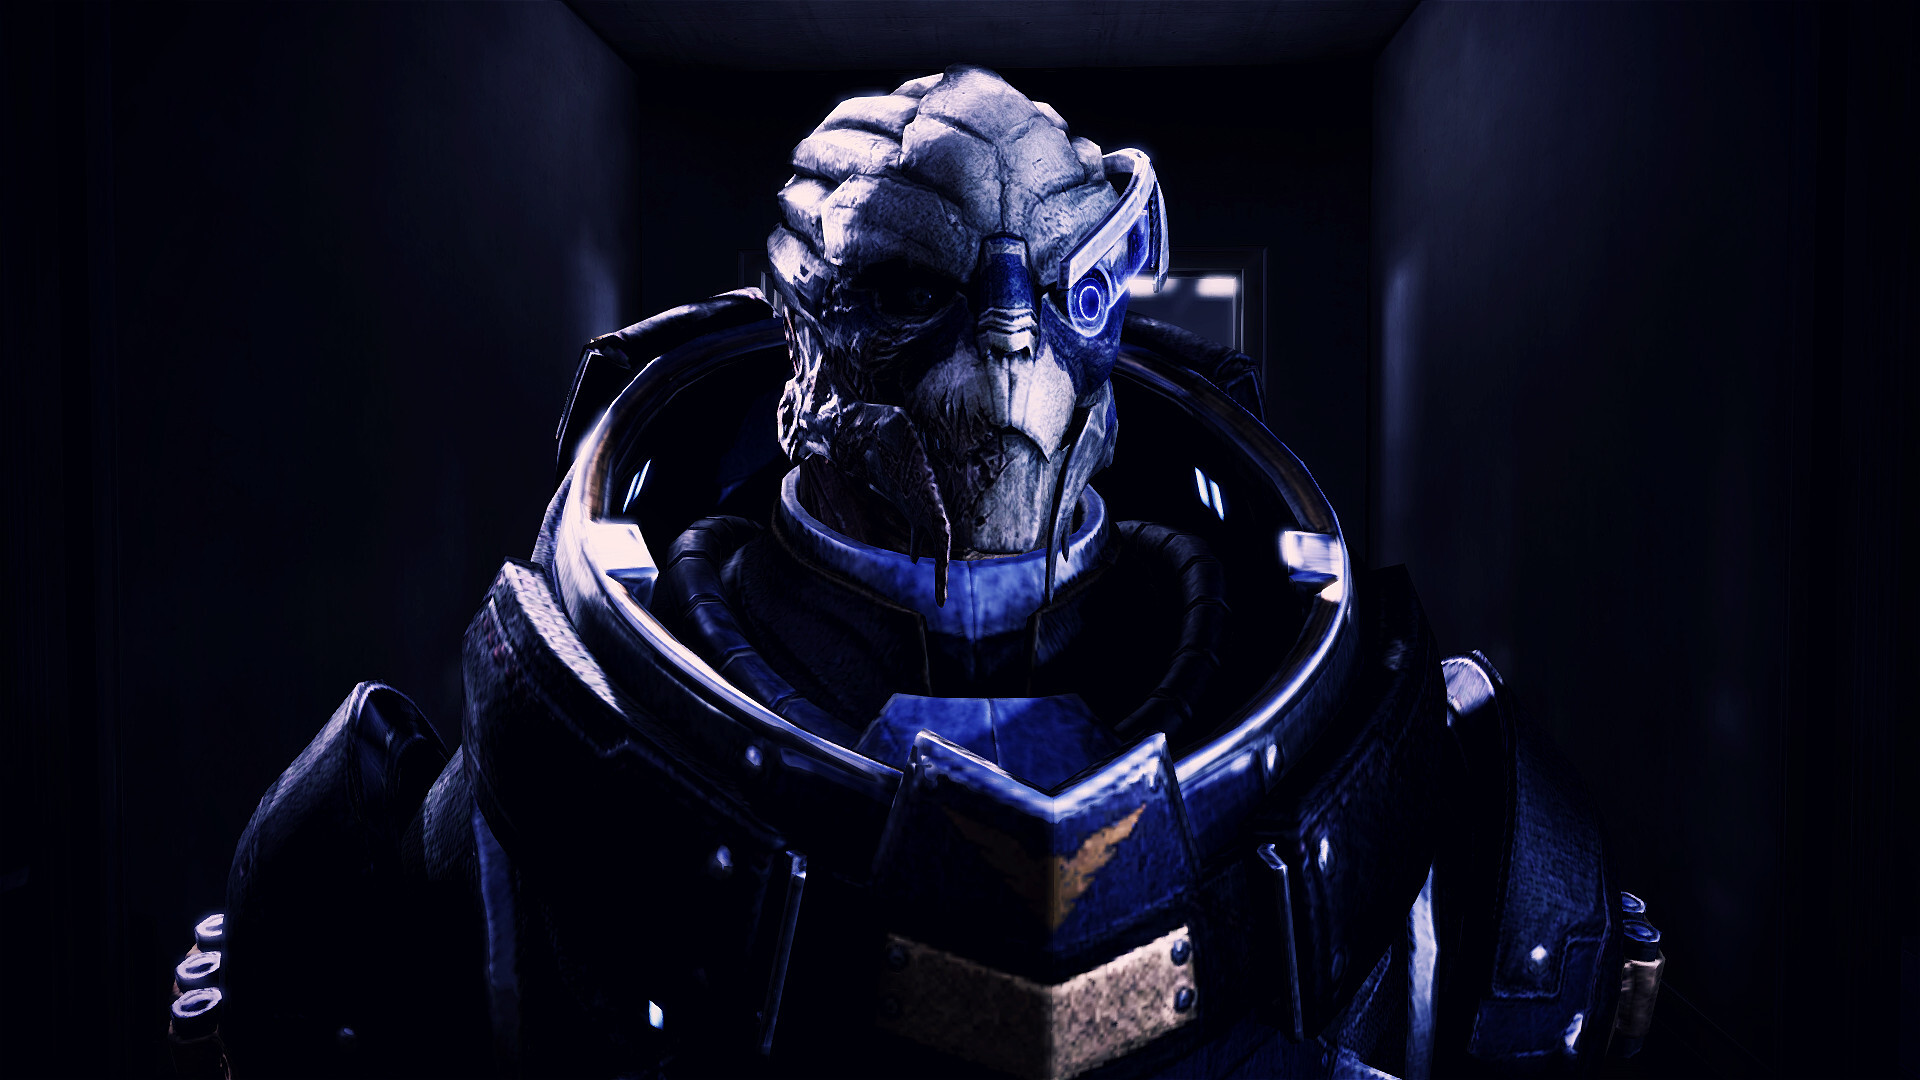 Garrus Vakarian: Archangel, The weaponry expert and the primary enemy for the Terminus Systems' mercenary groups. 1920x1080 Full HD Background.